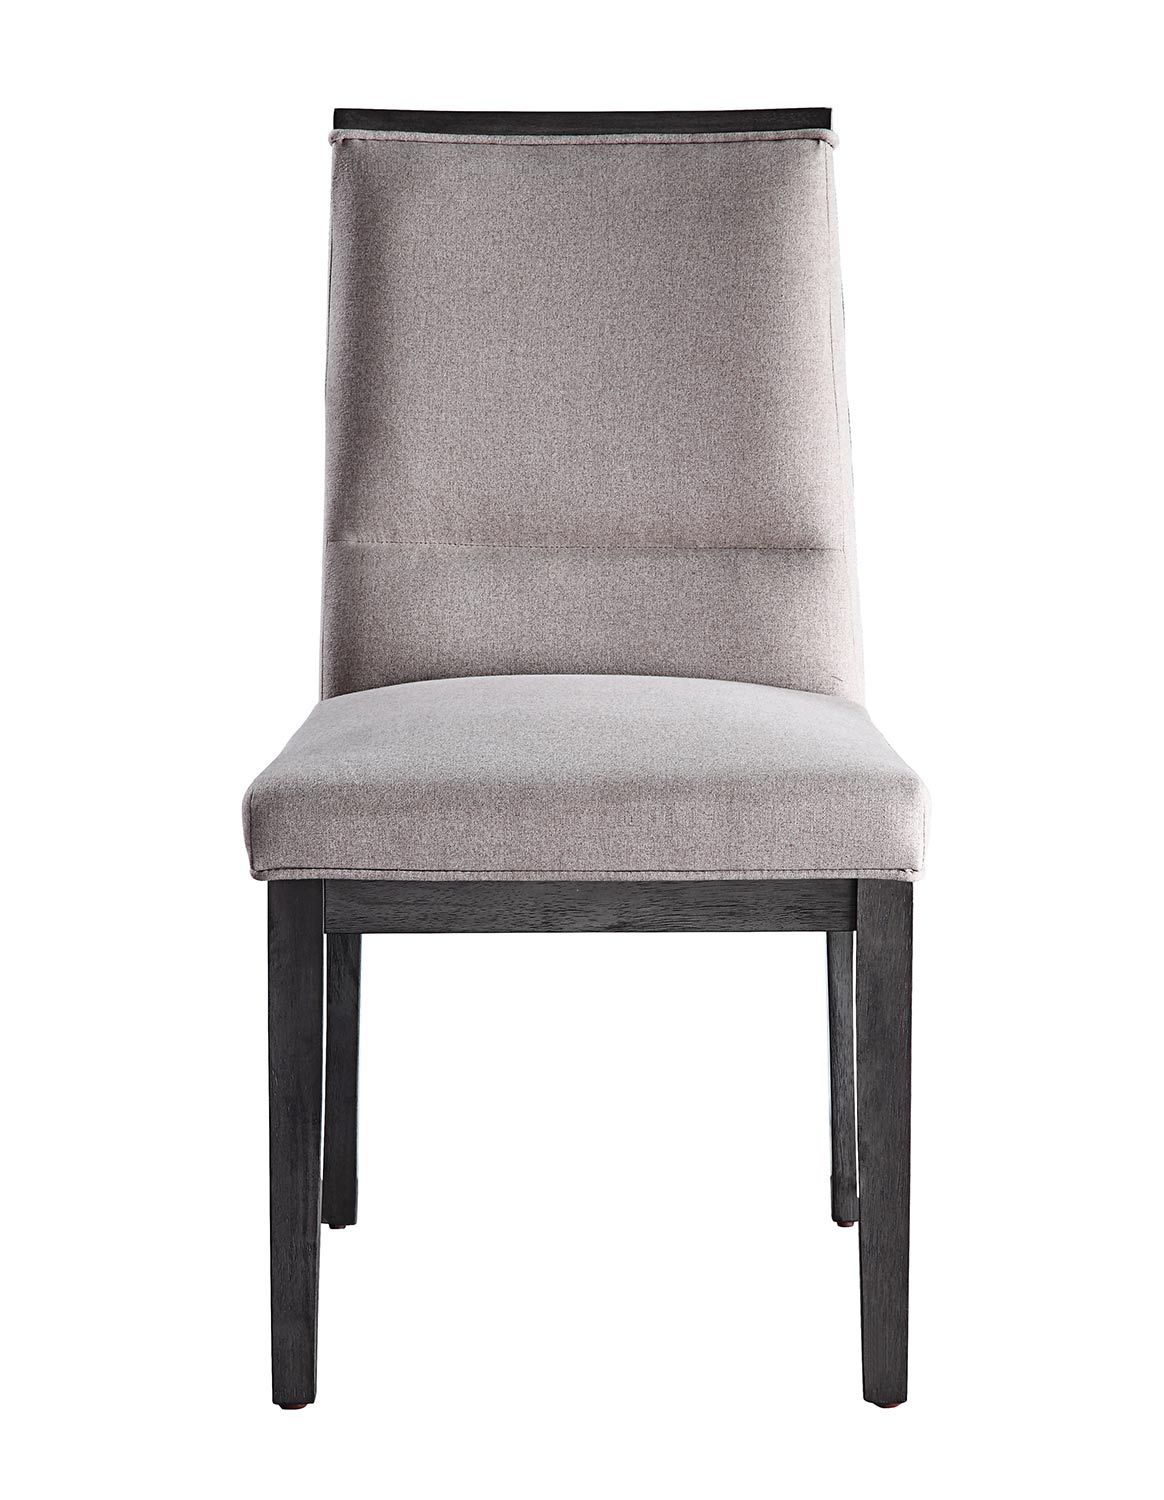 Homelegance Standish Side Chair - Gray